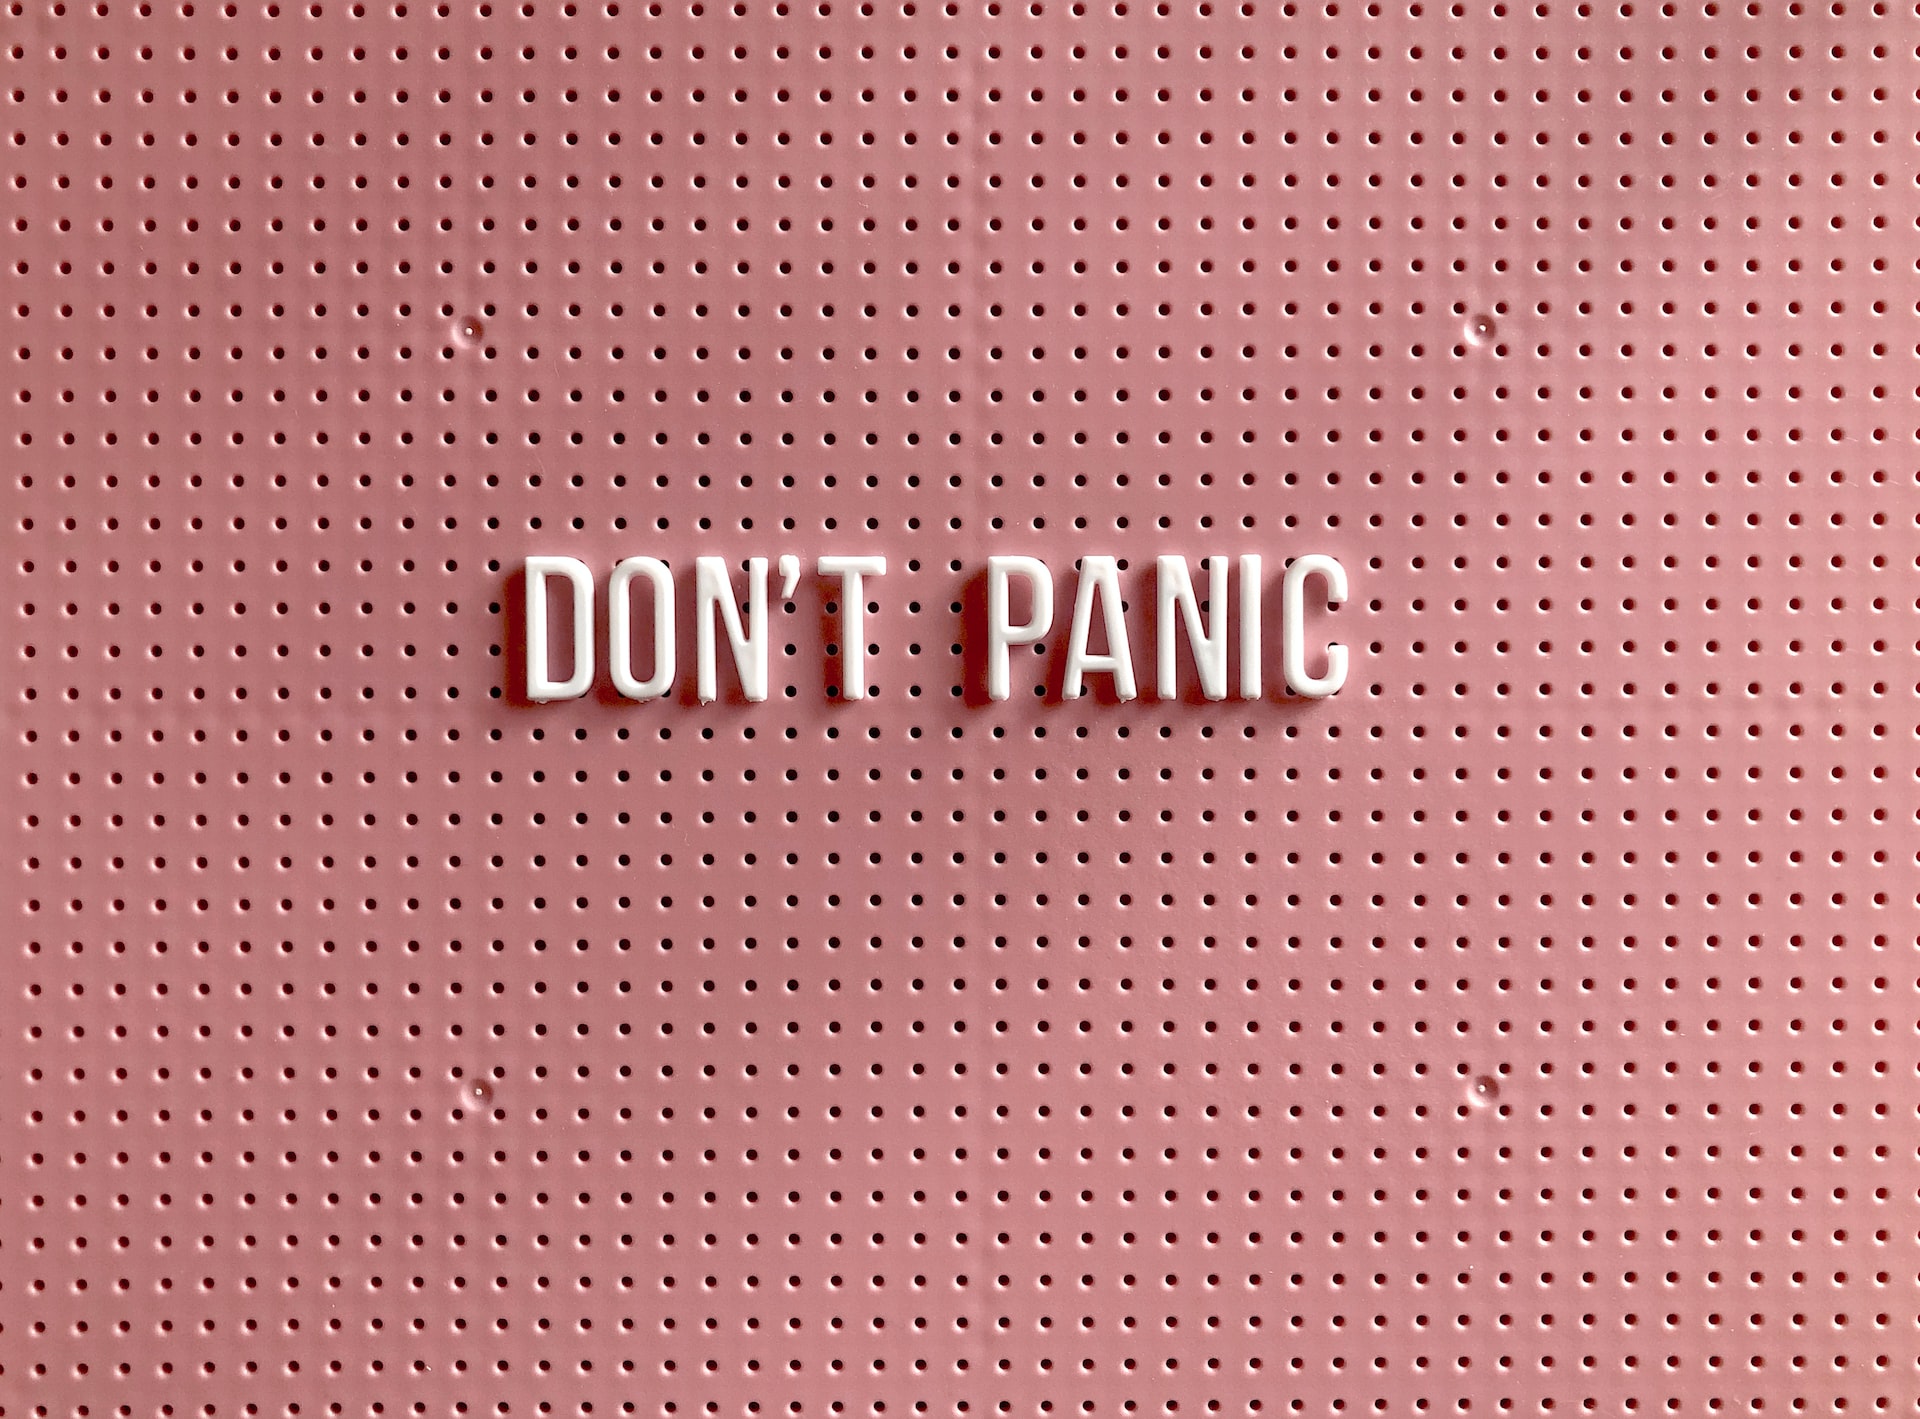 How to manage fear within your team (Do not panic)